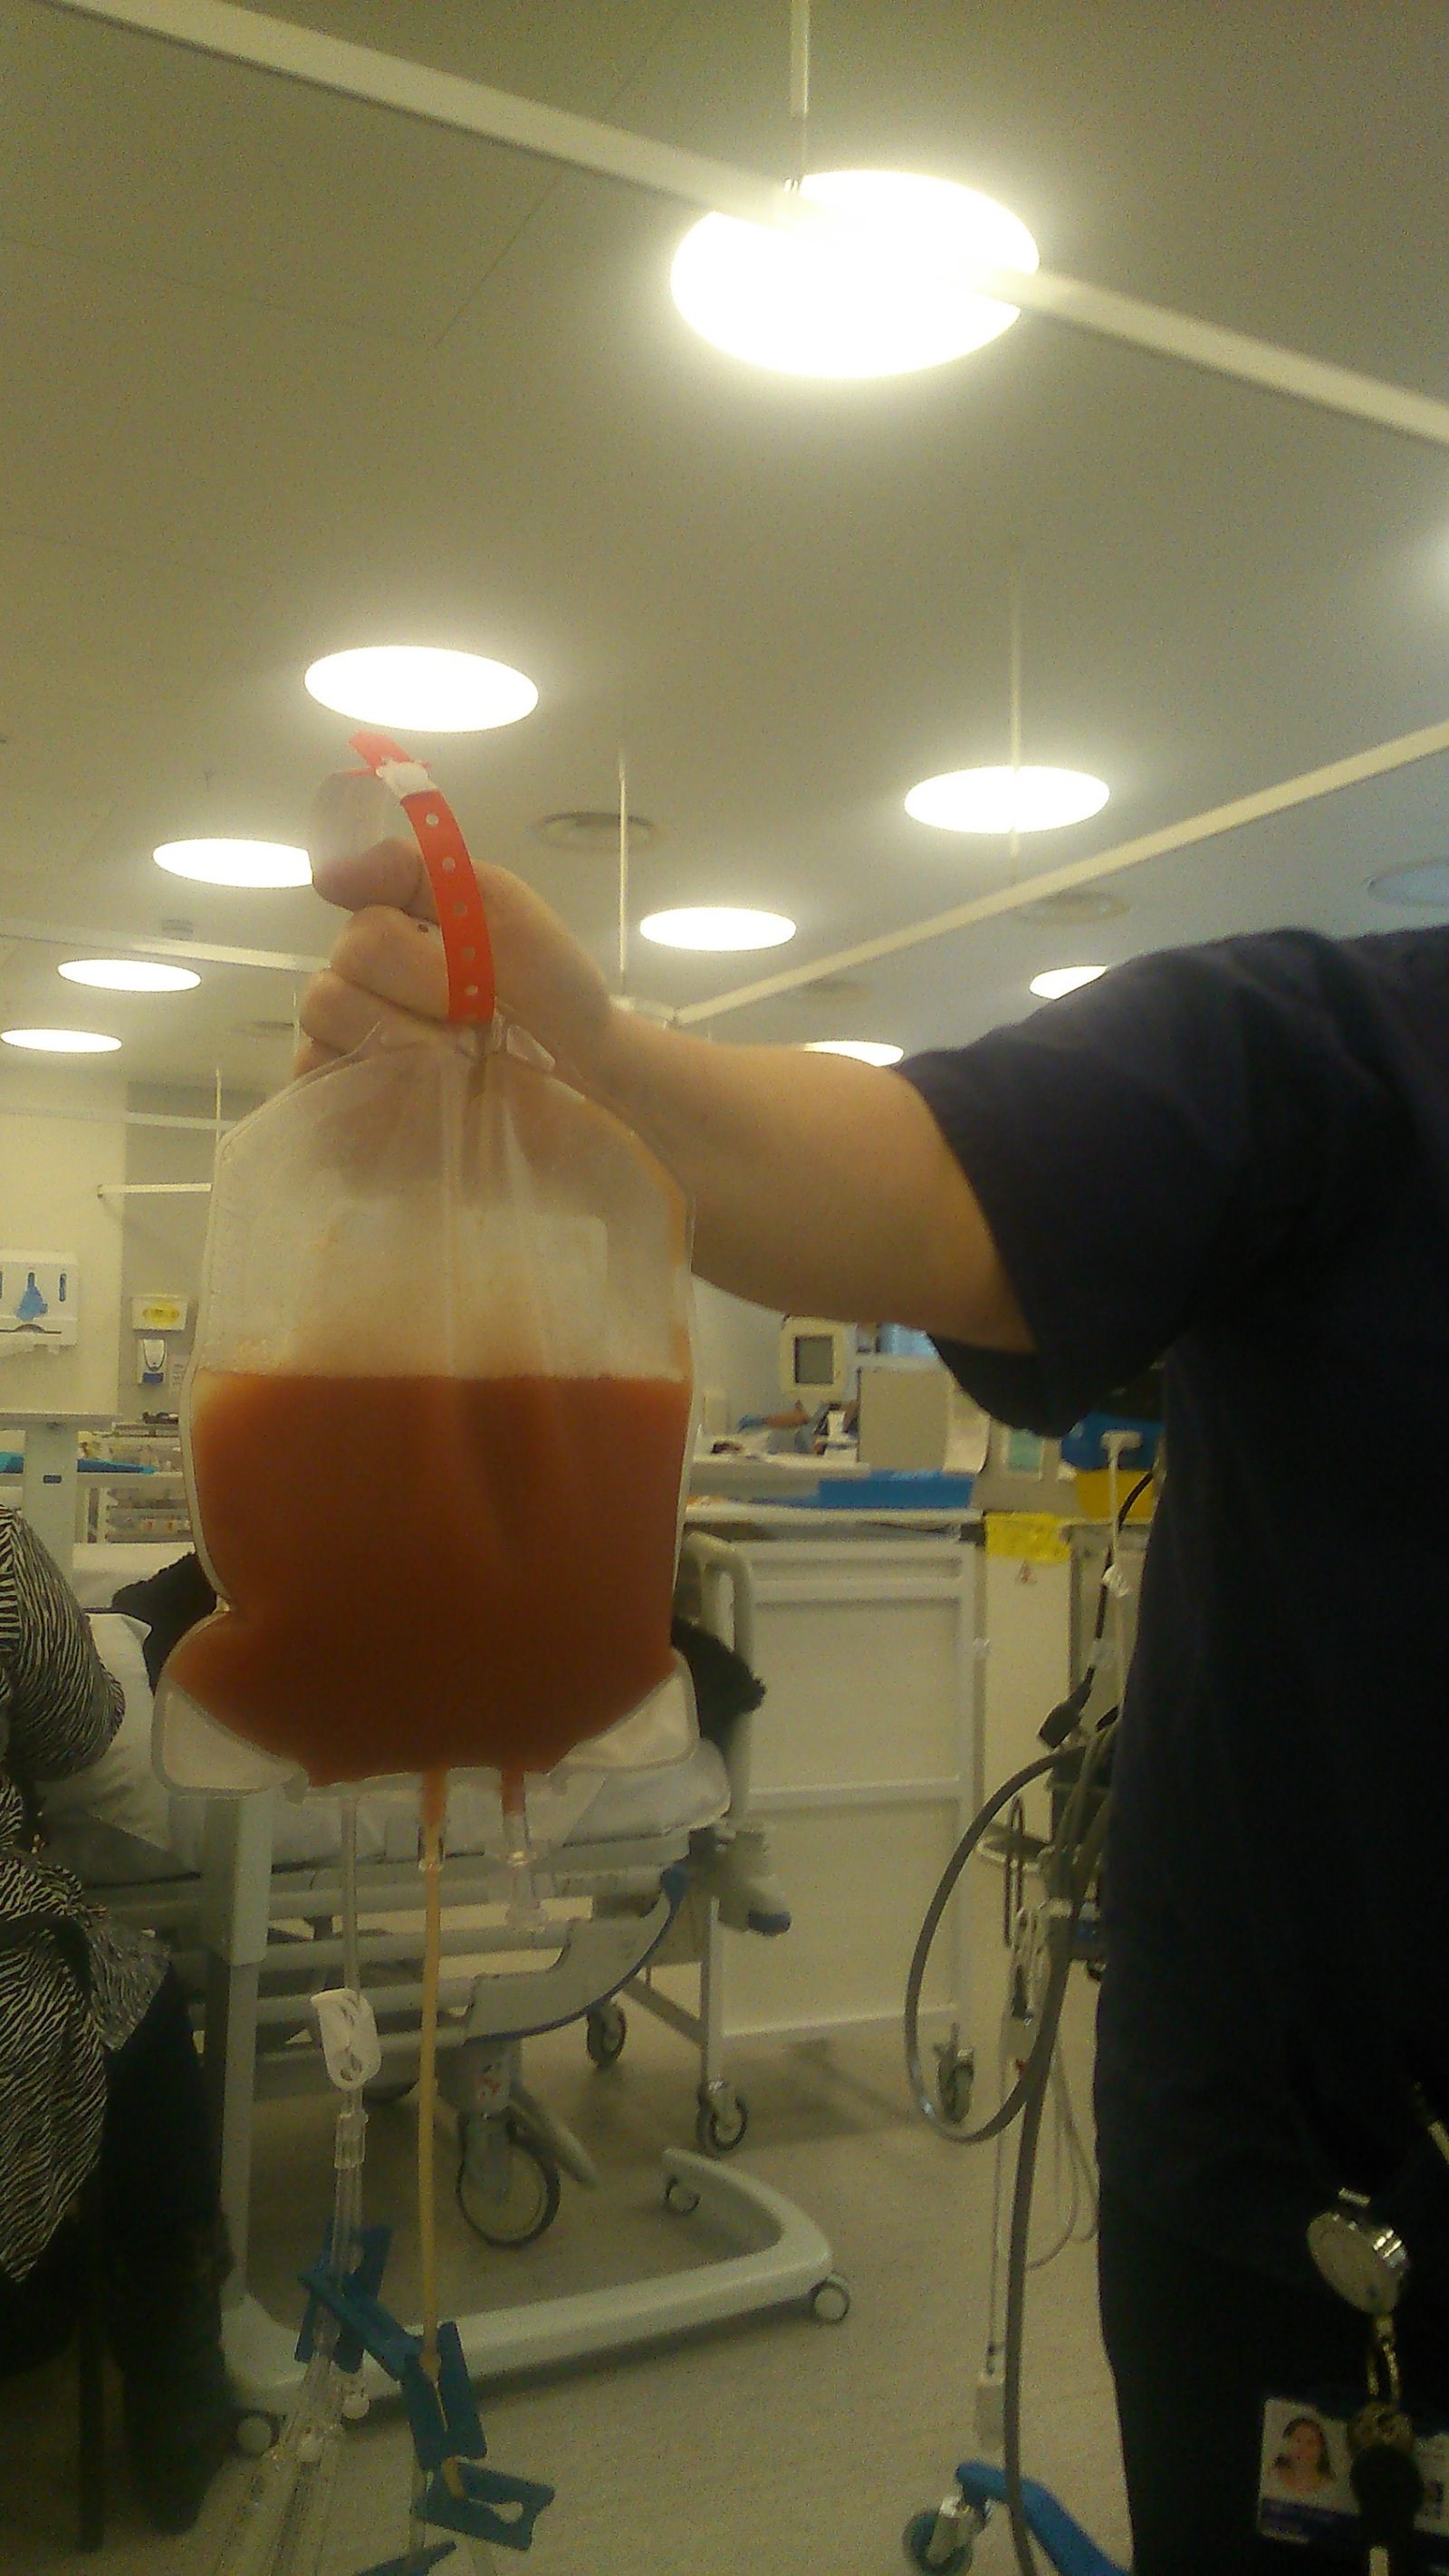 Bag containing Tim's stem cells for George's transplant